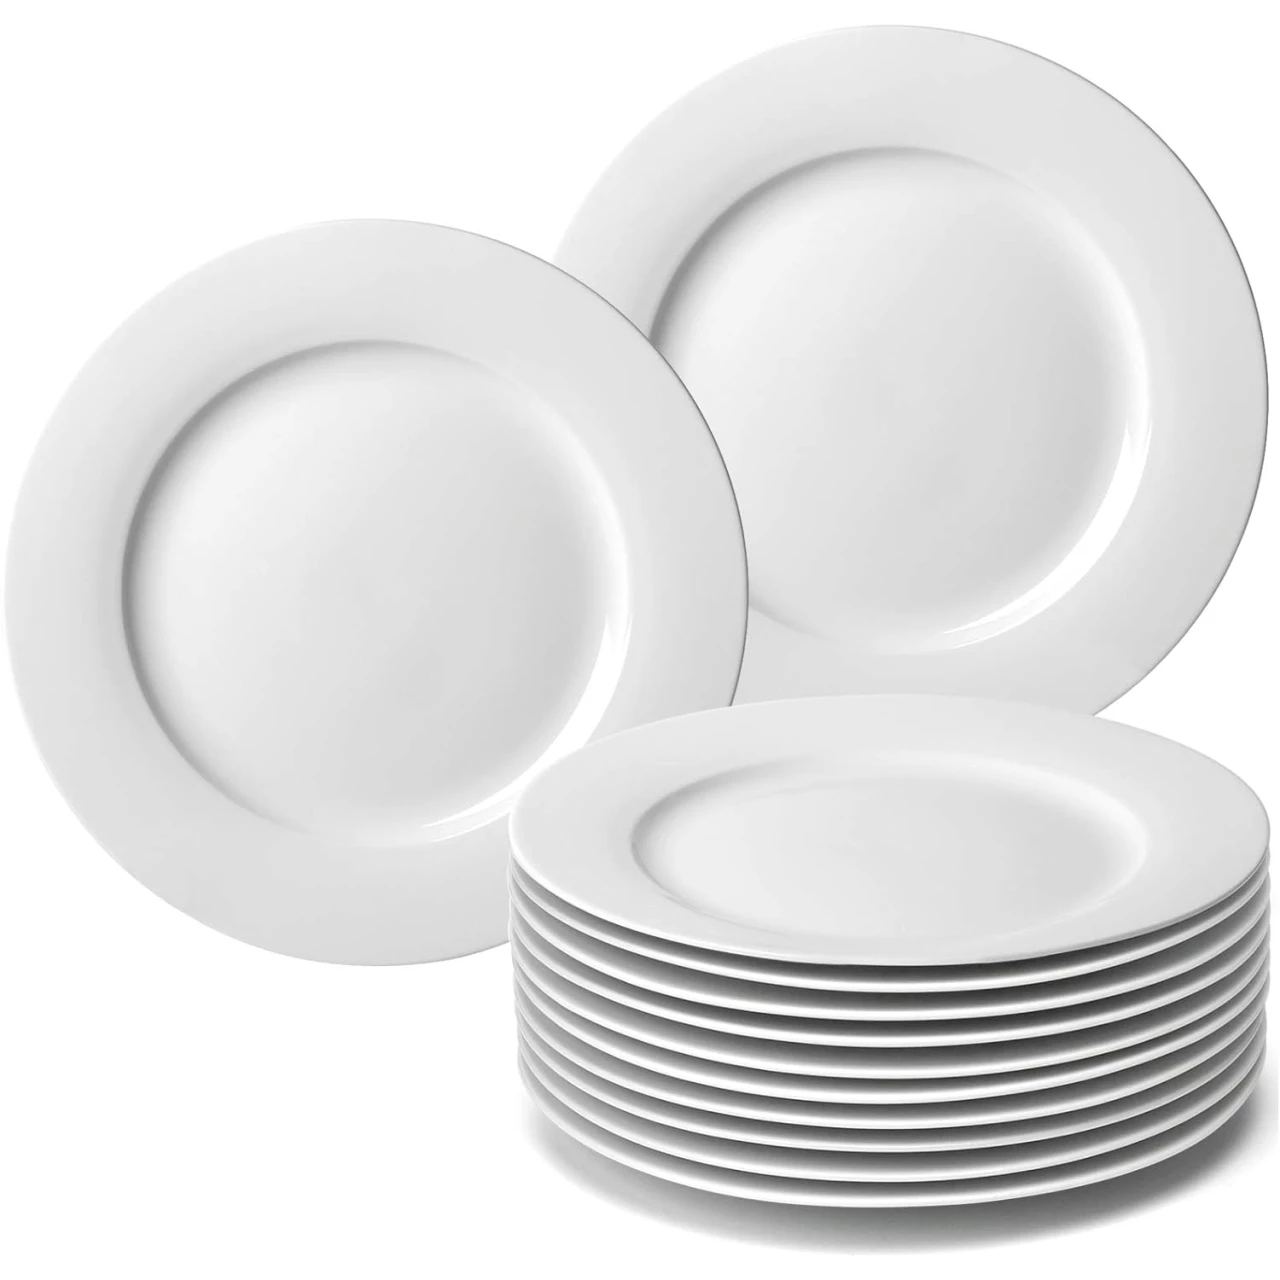 amhomel 12-Piece White Porcelain Dinner Plates, Round Dessert or Salad Plate, Serving Dishes, Dinnerware Sets, Scratch Resistant, Lead-Free, Microwave, Oven and Dishwasher Safe (10.5-inch)